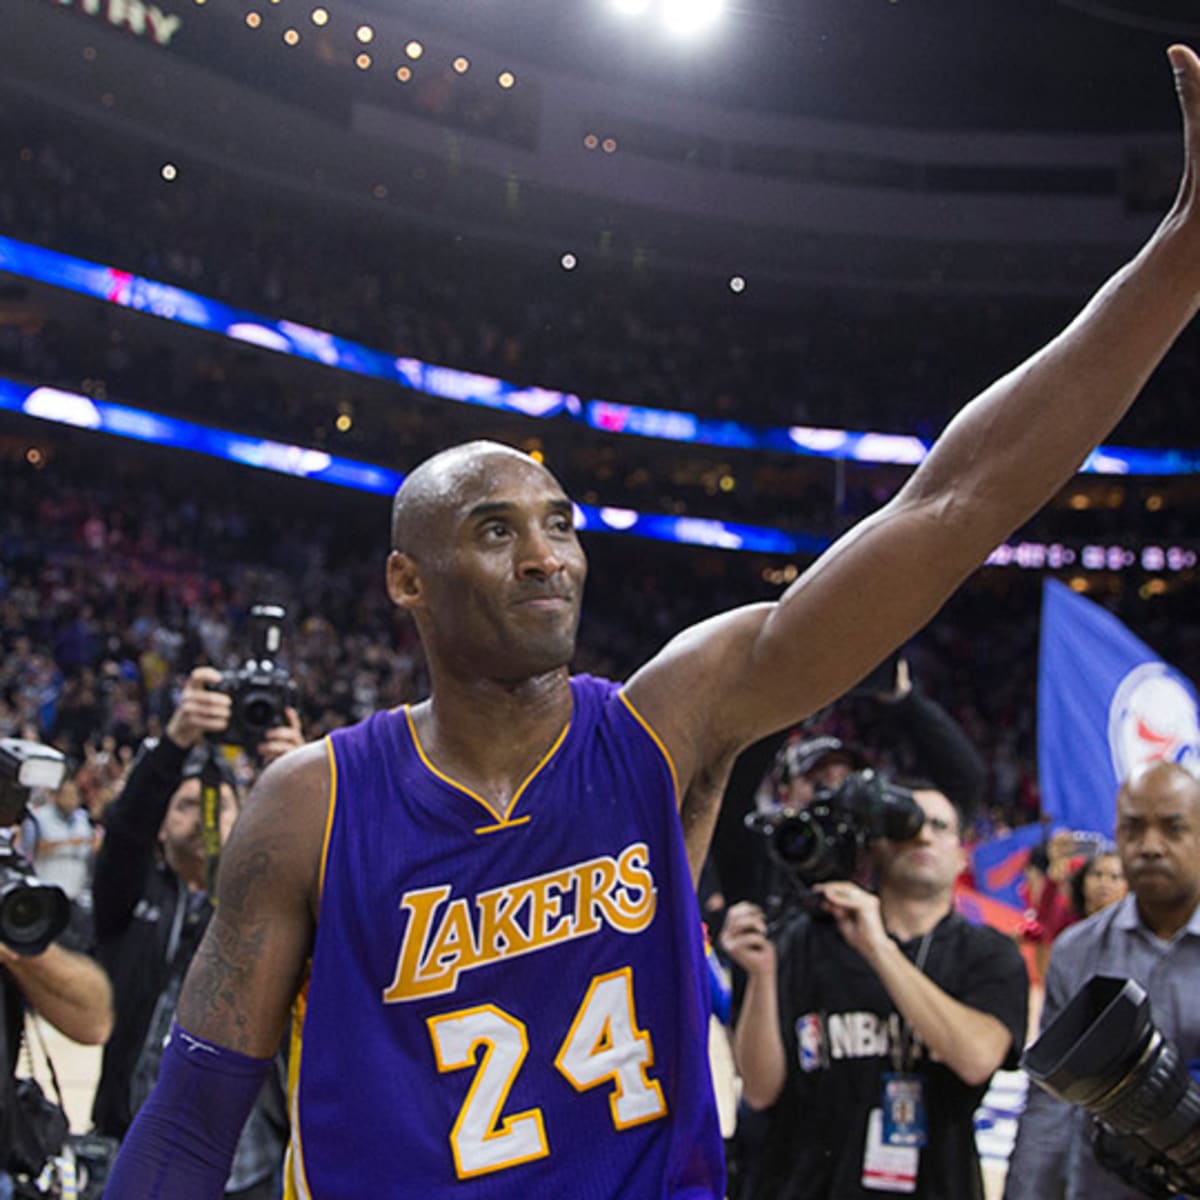 Floor signed by Kobe Bryant after farewell NBA appearance could